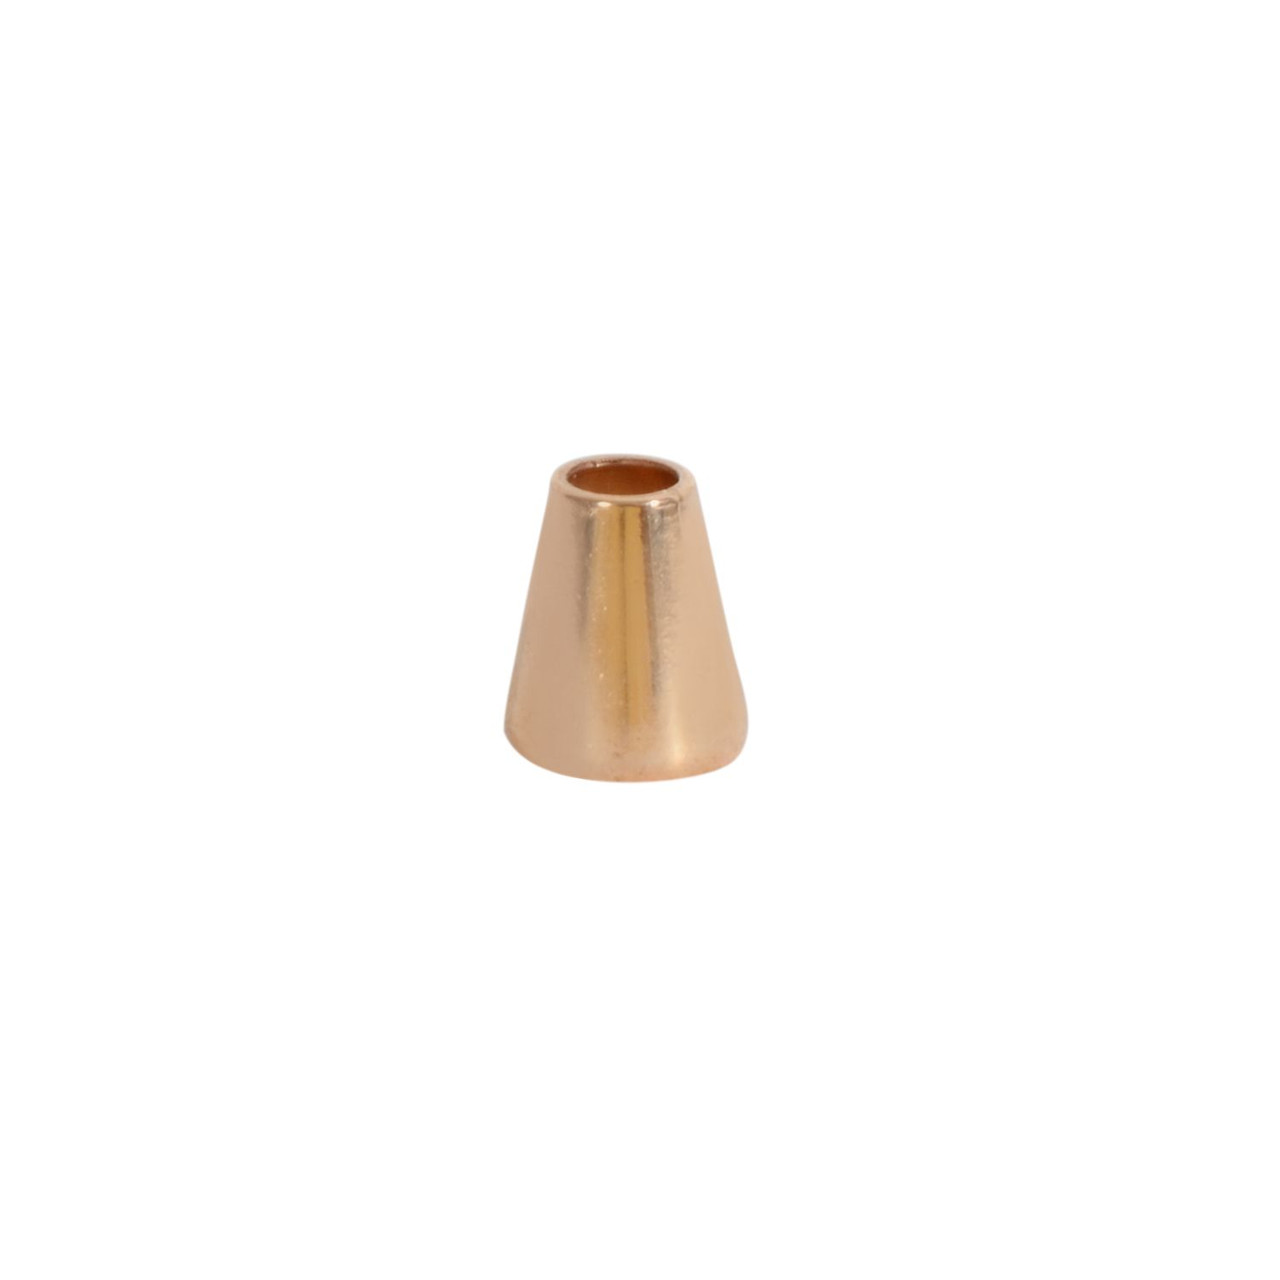 Metal Cord Stopper - Gold - (Pack of 2)